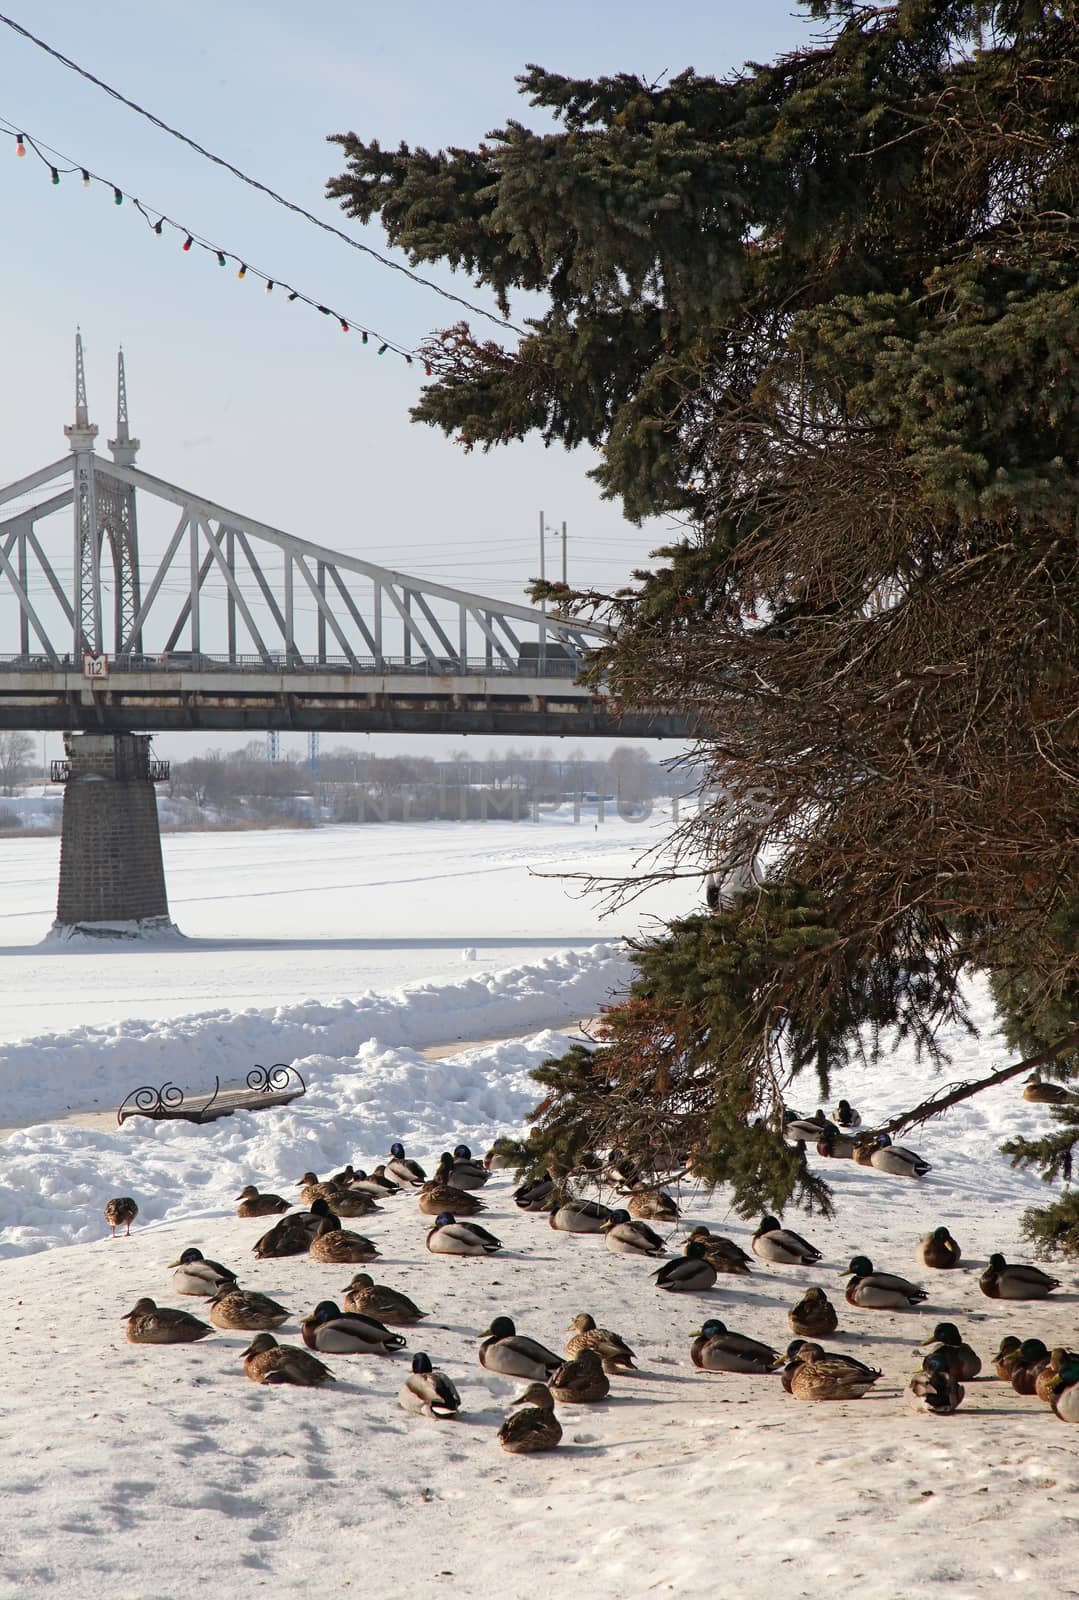 Lots of ducks in the winter near the river. Brown and gray. by sergasx